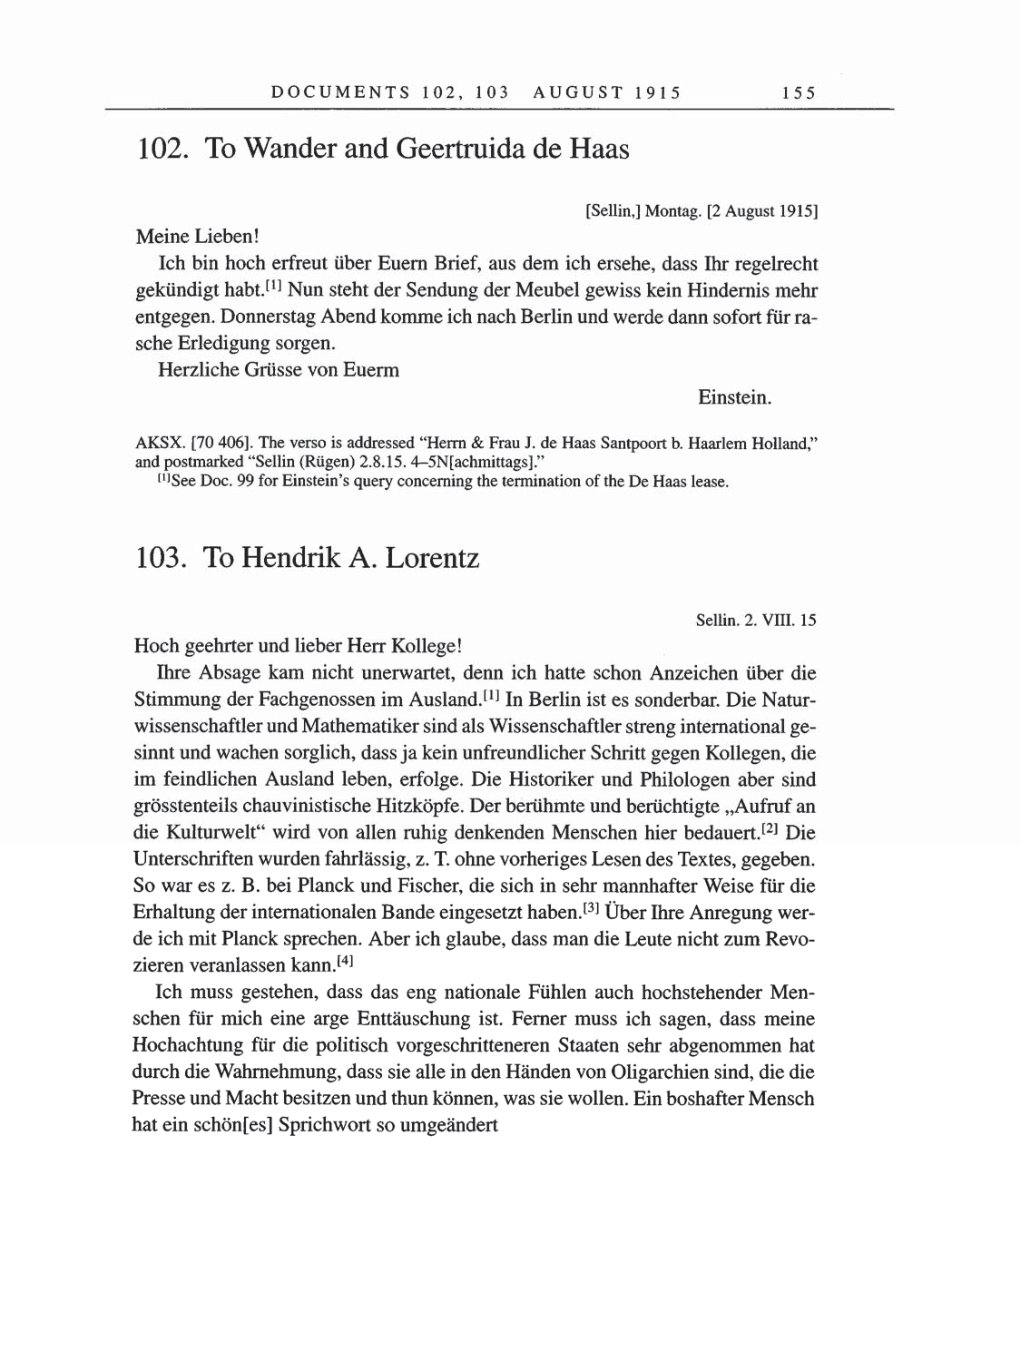 Volume 8, Part A: The Berlin Years: Correspondence 1914-1917 page 155